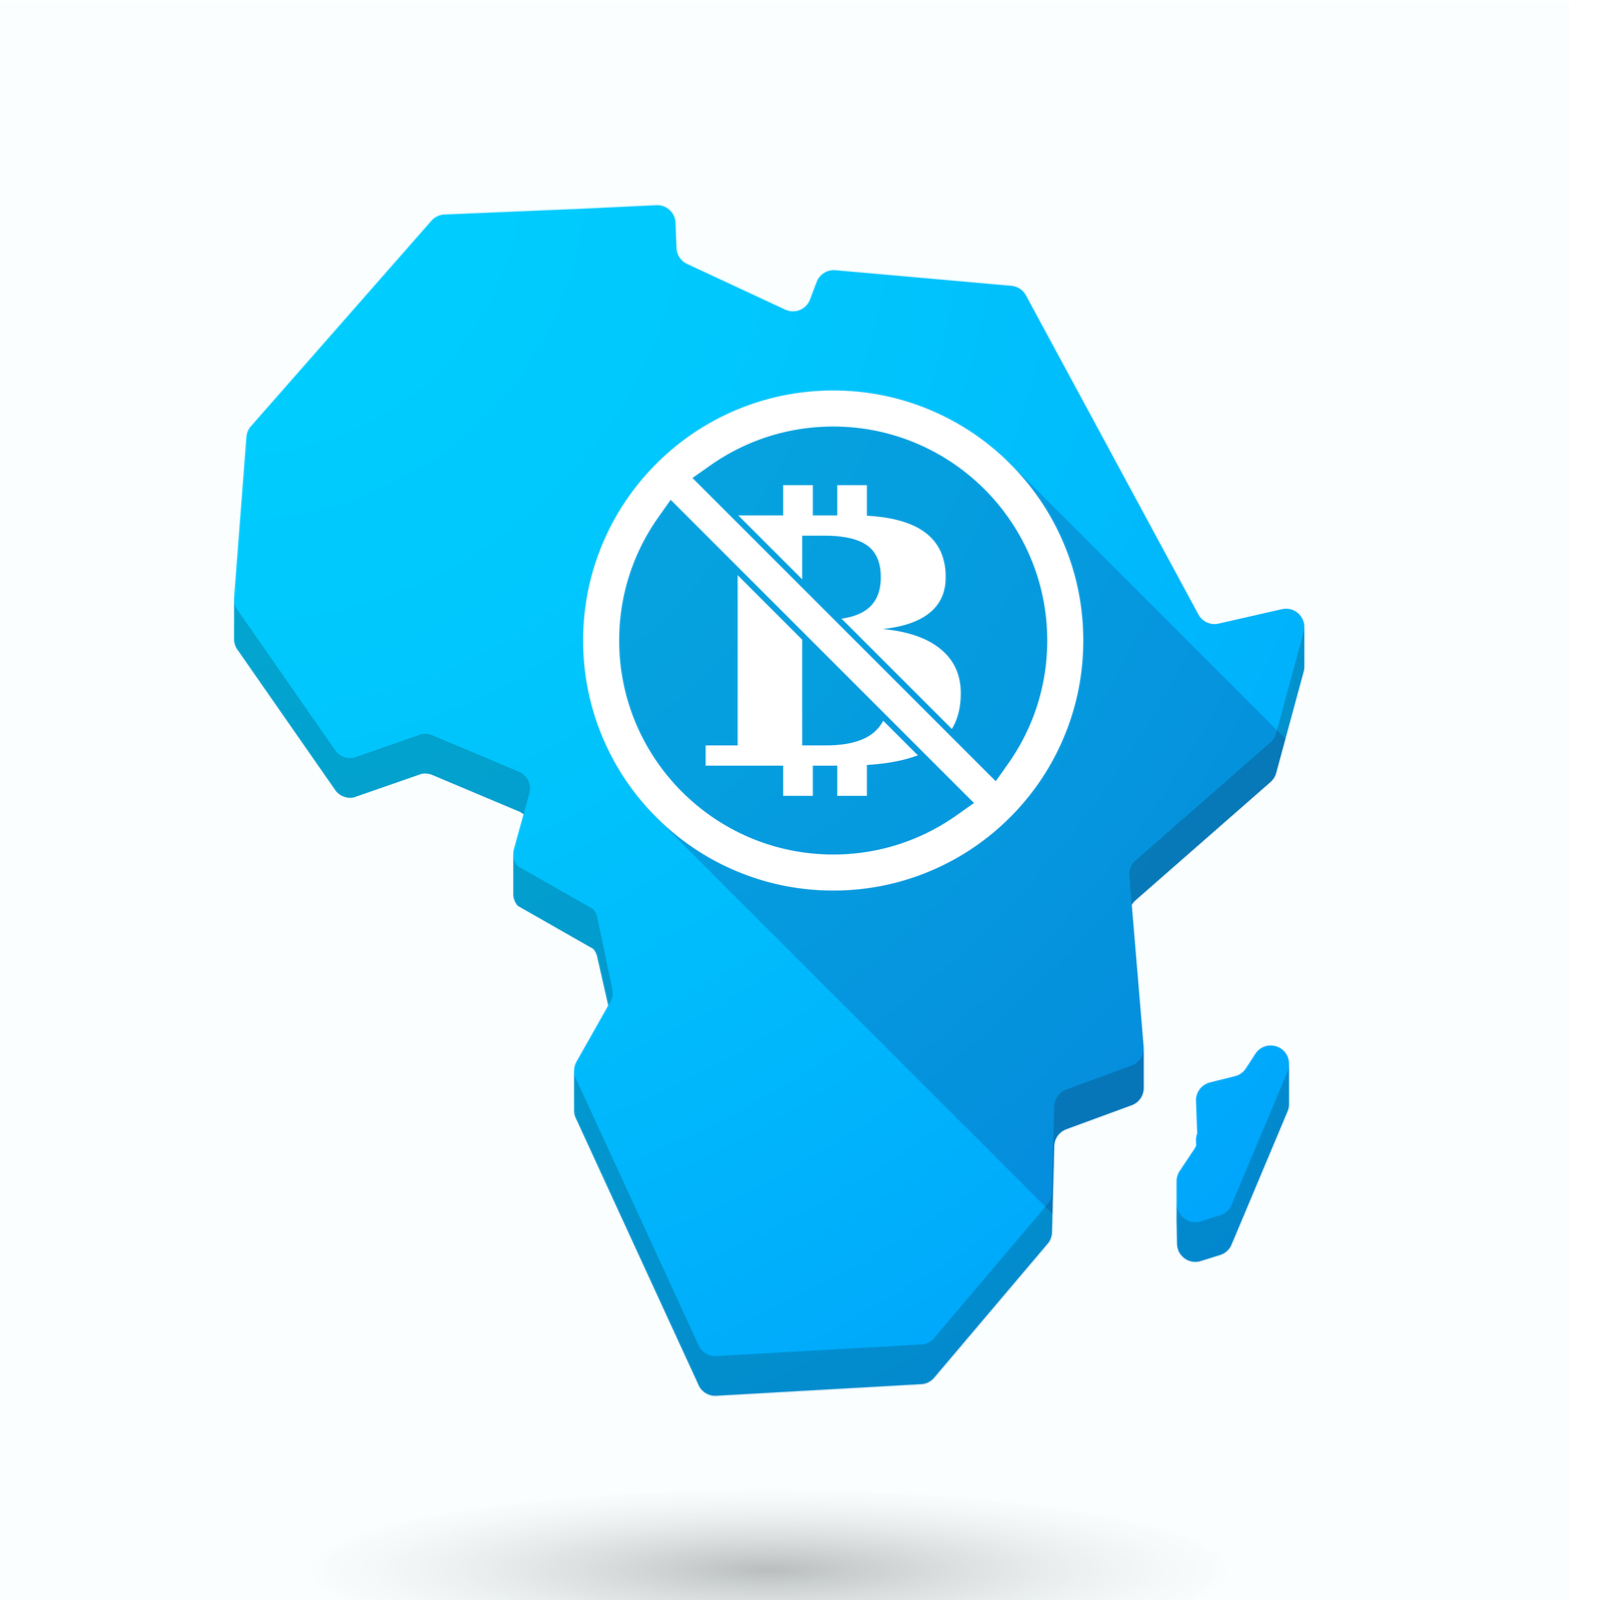 Regulation Round-Up: African Governments Hesitant on Bitcoin and Cryptocurrencies